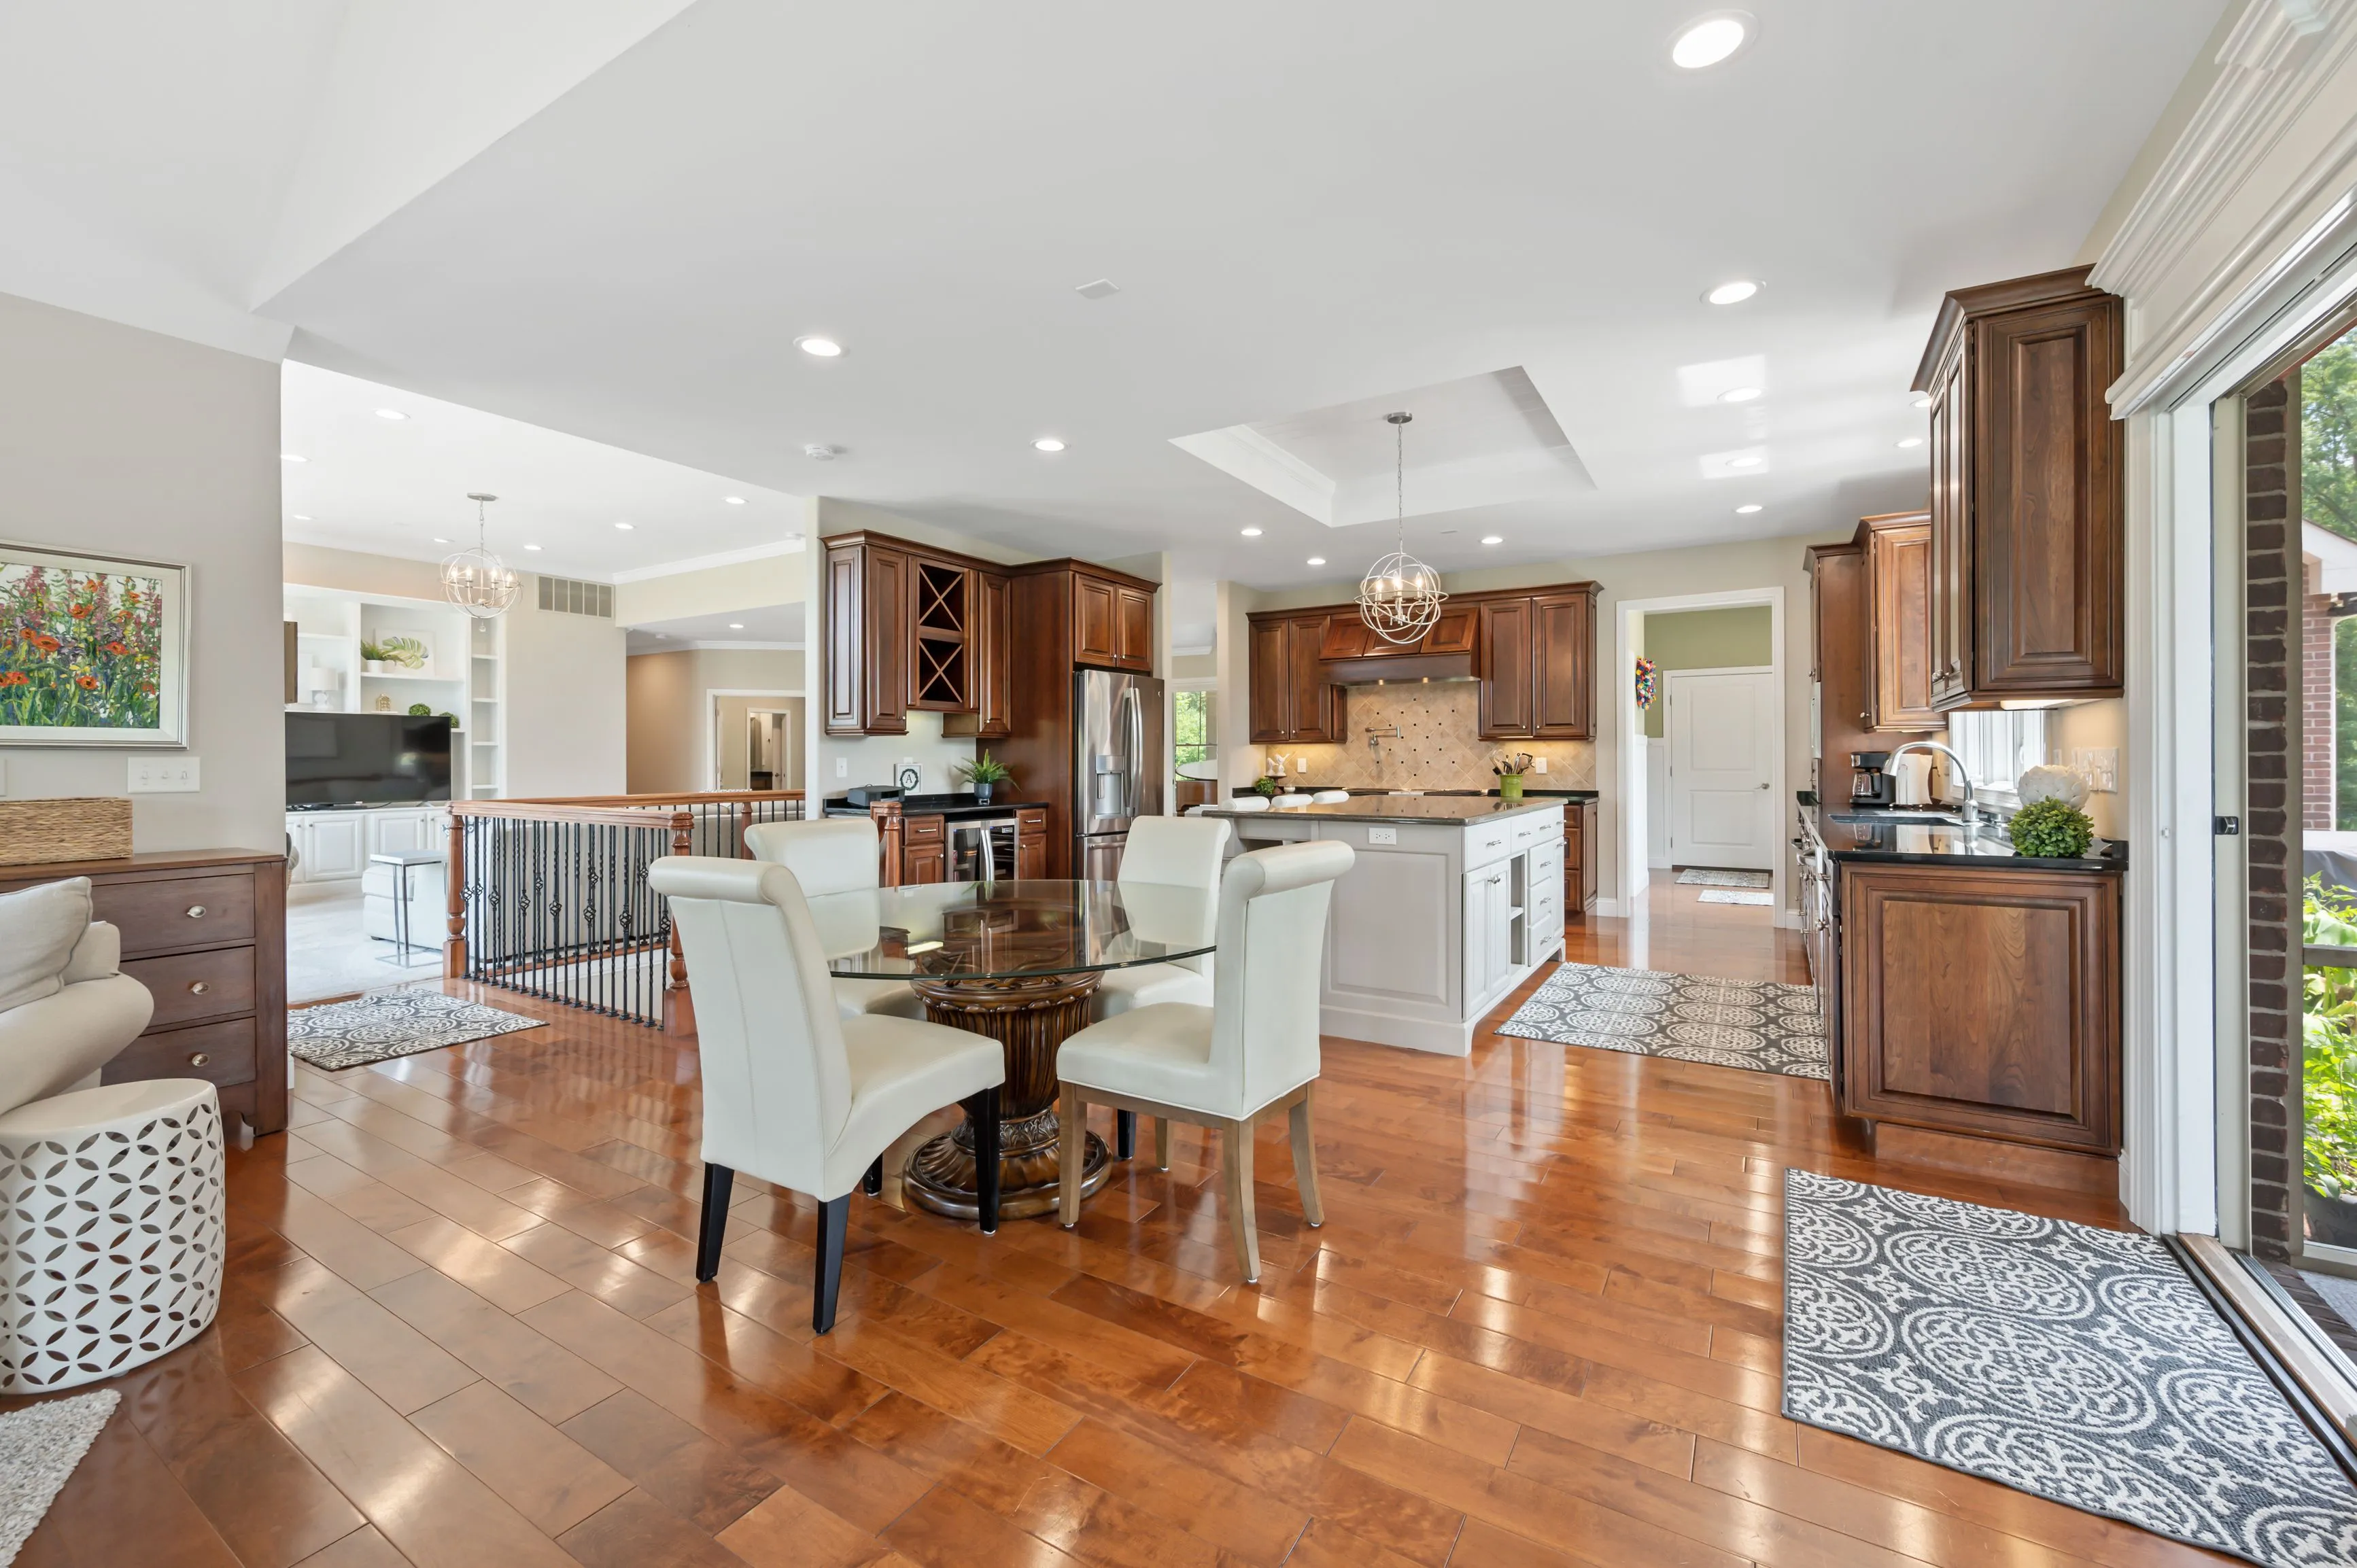 Spacious modern kitchen with polished wooden floors, white dining set, and stainless steel appliances, opening to a living area.